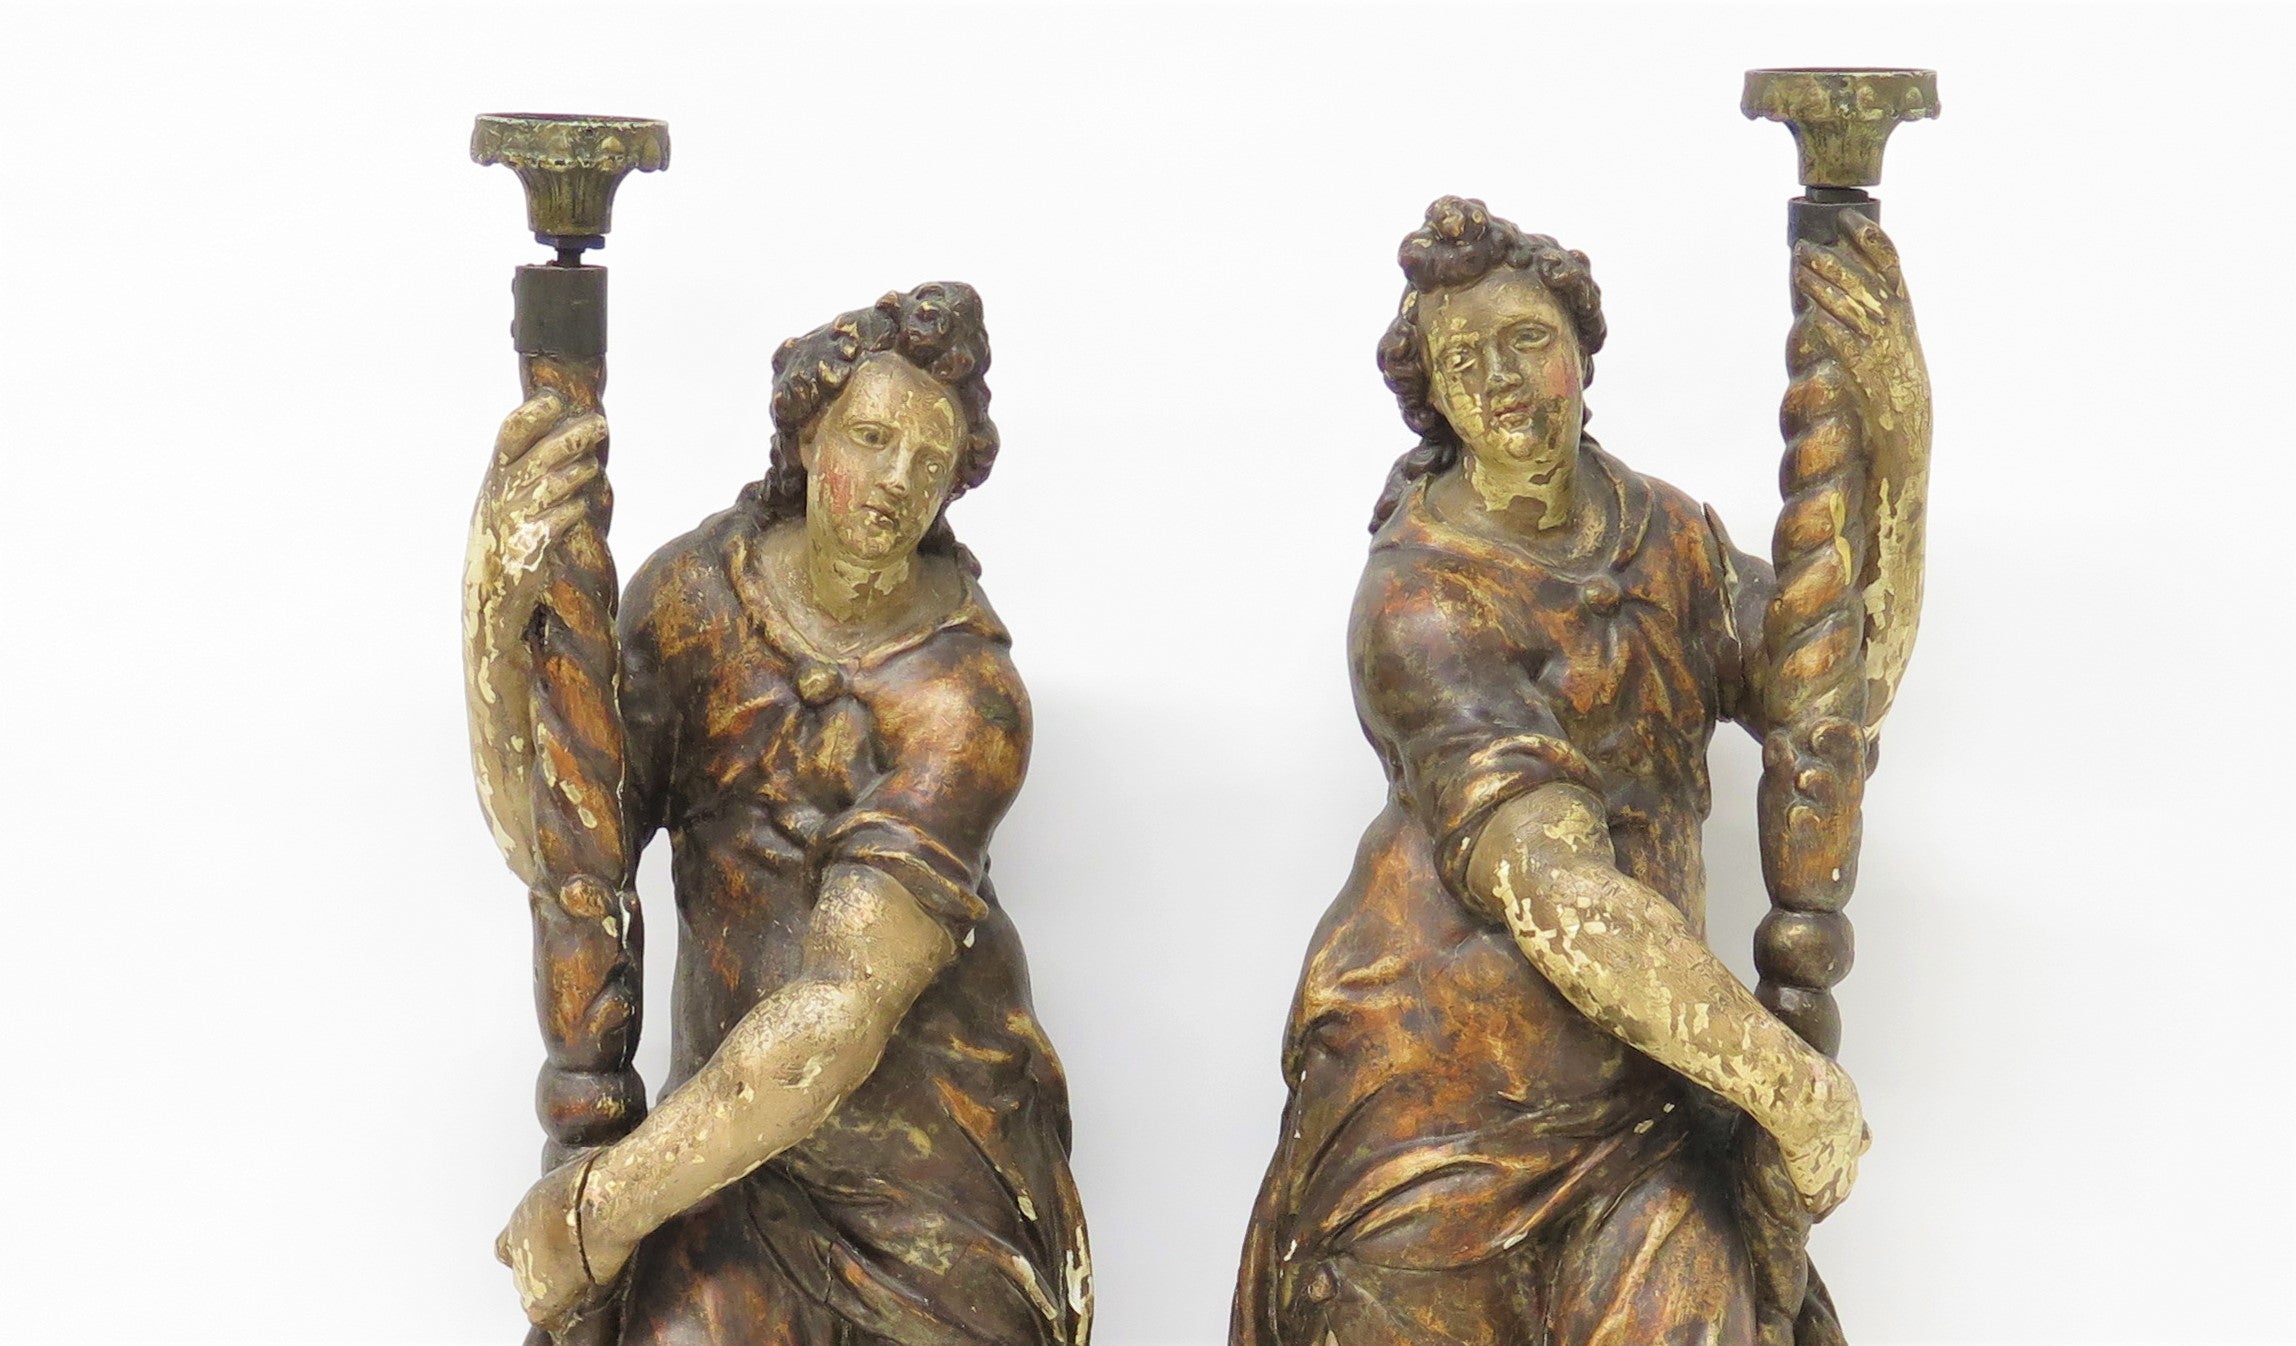 Pair of Large Scale Italian Figural Candlesticks, Polychromed and Gilded